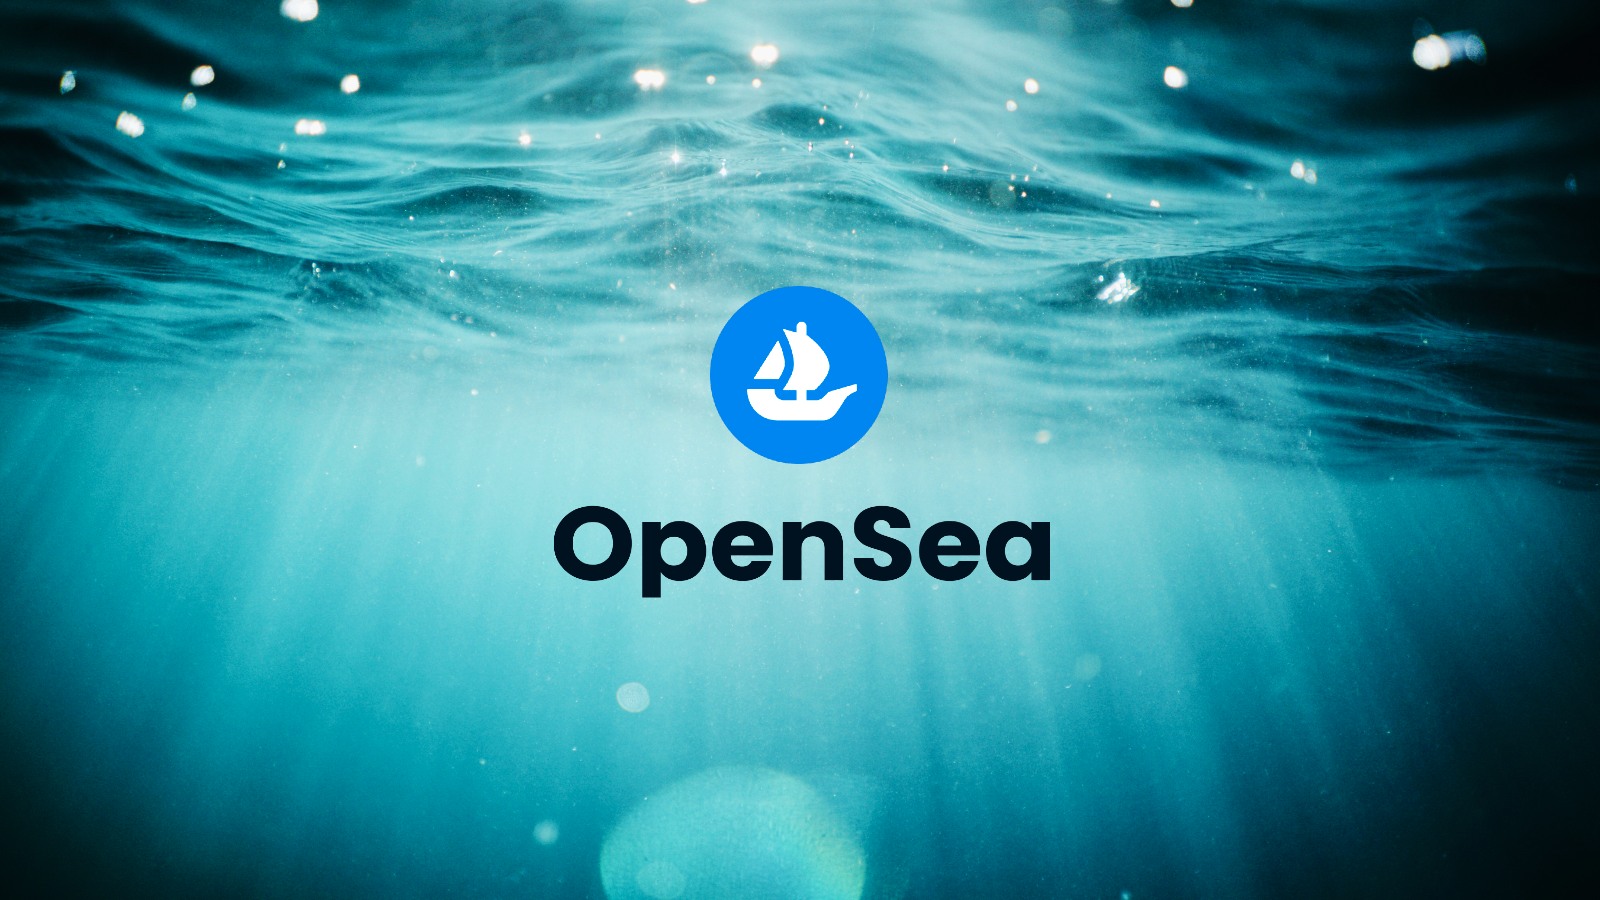 OpenSea 2.0: Market Revival And Focus On NFT Utility